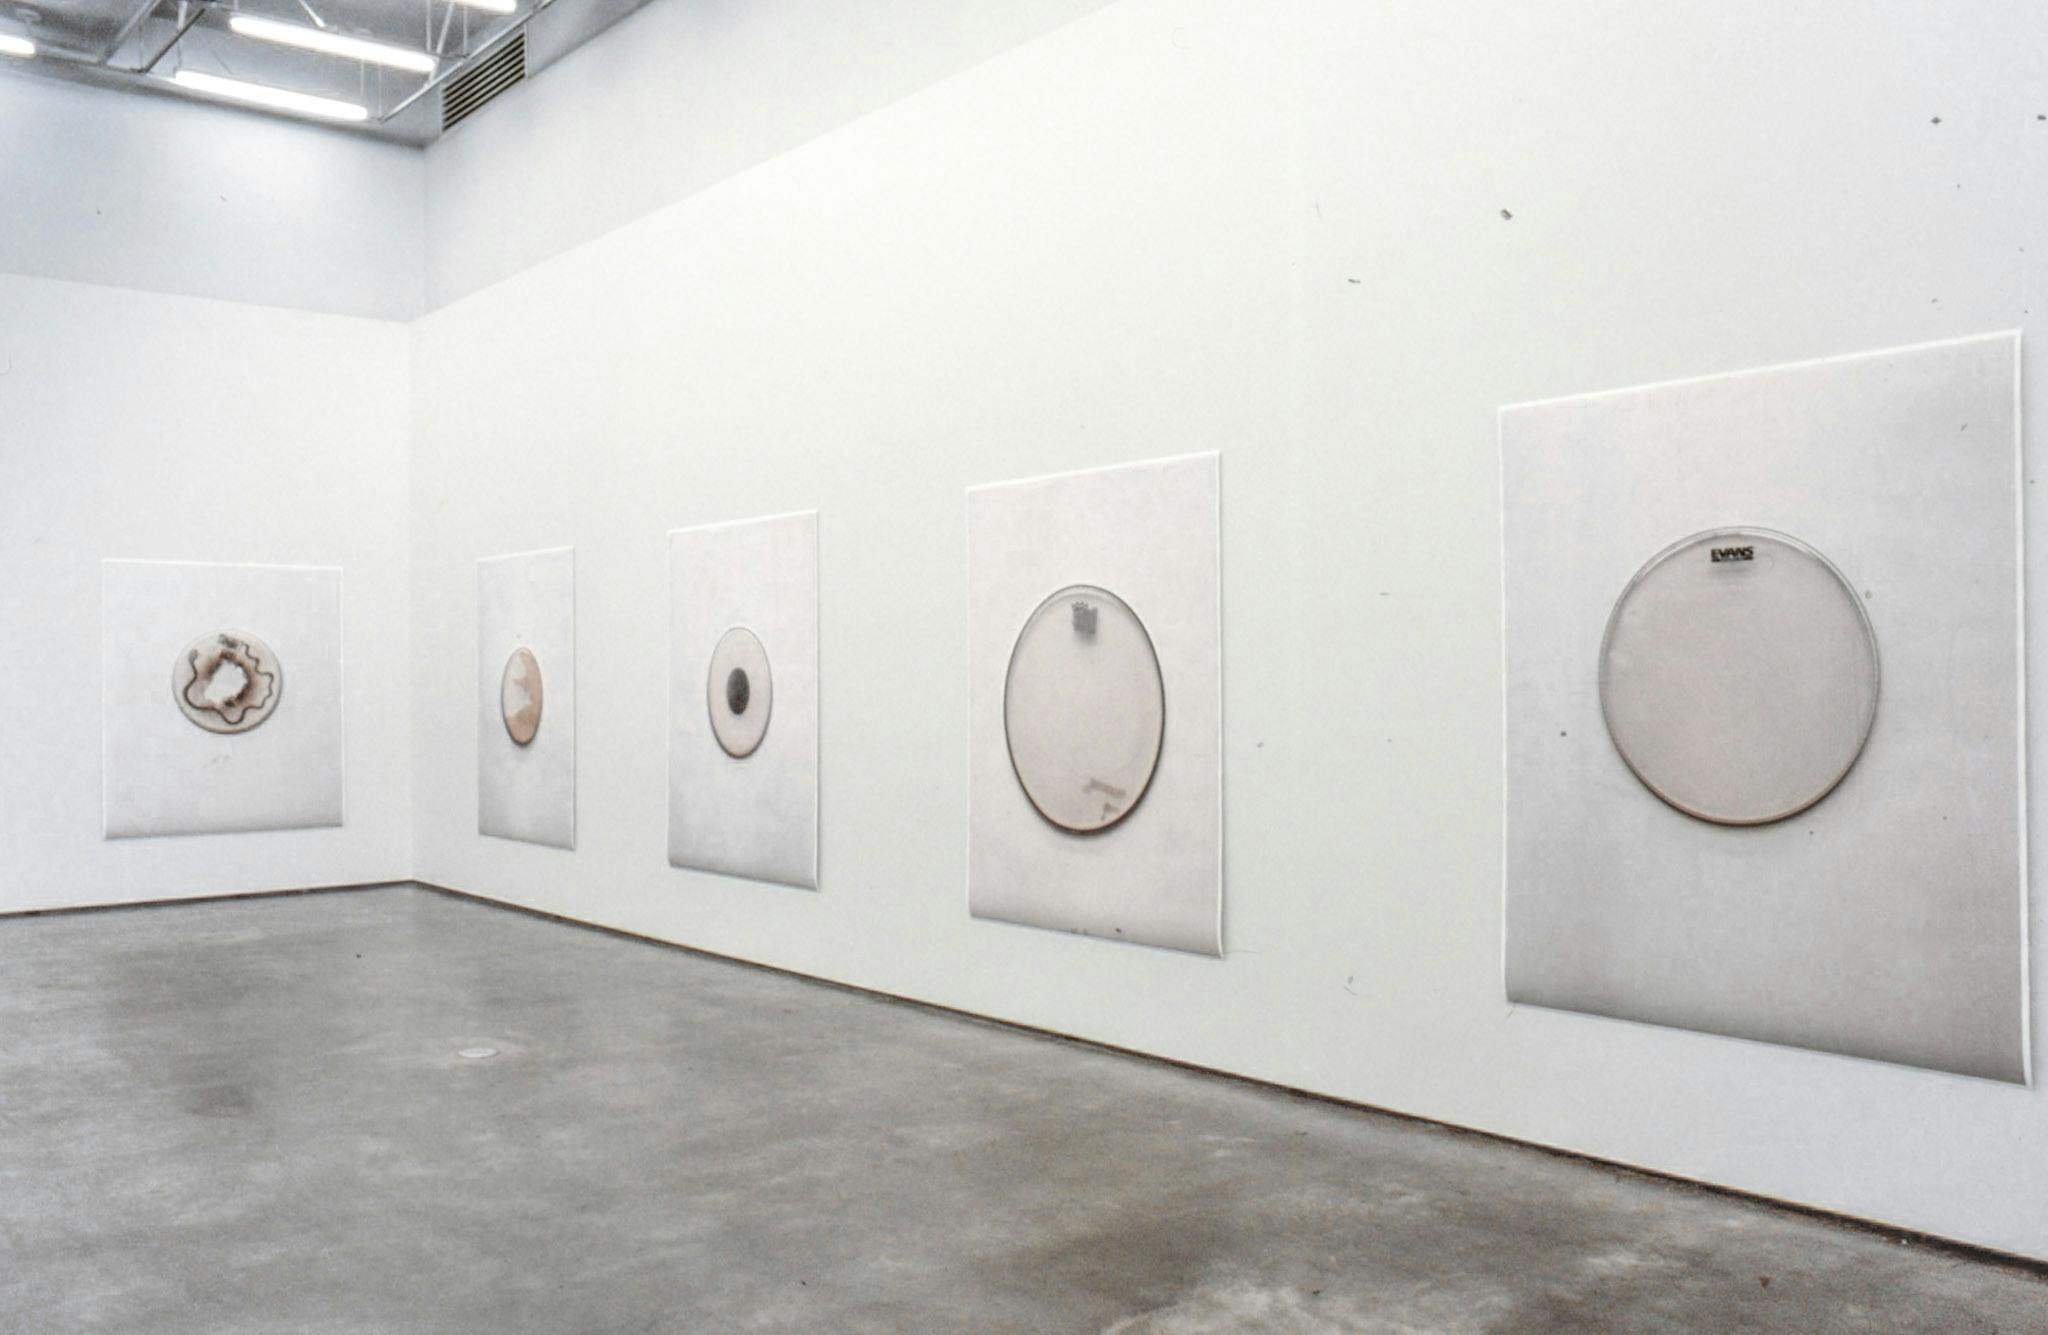 Five large-sized coloured photographs are installed on the gallery walls. They are all same-sized, and each of them depicts a different circular-shaped flat object including a drum cover. 